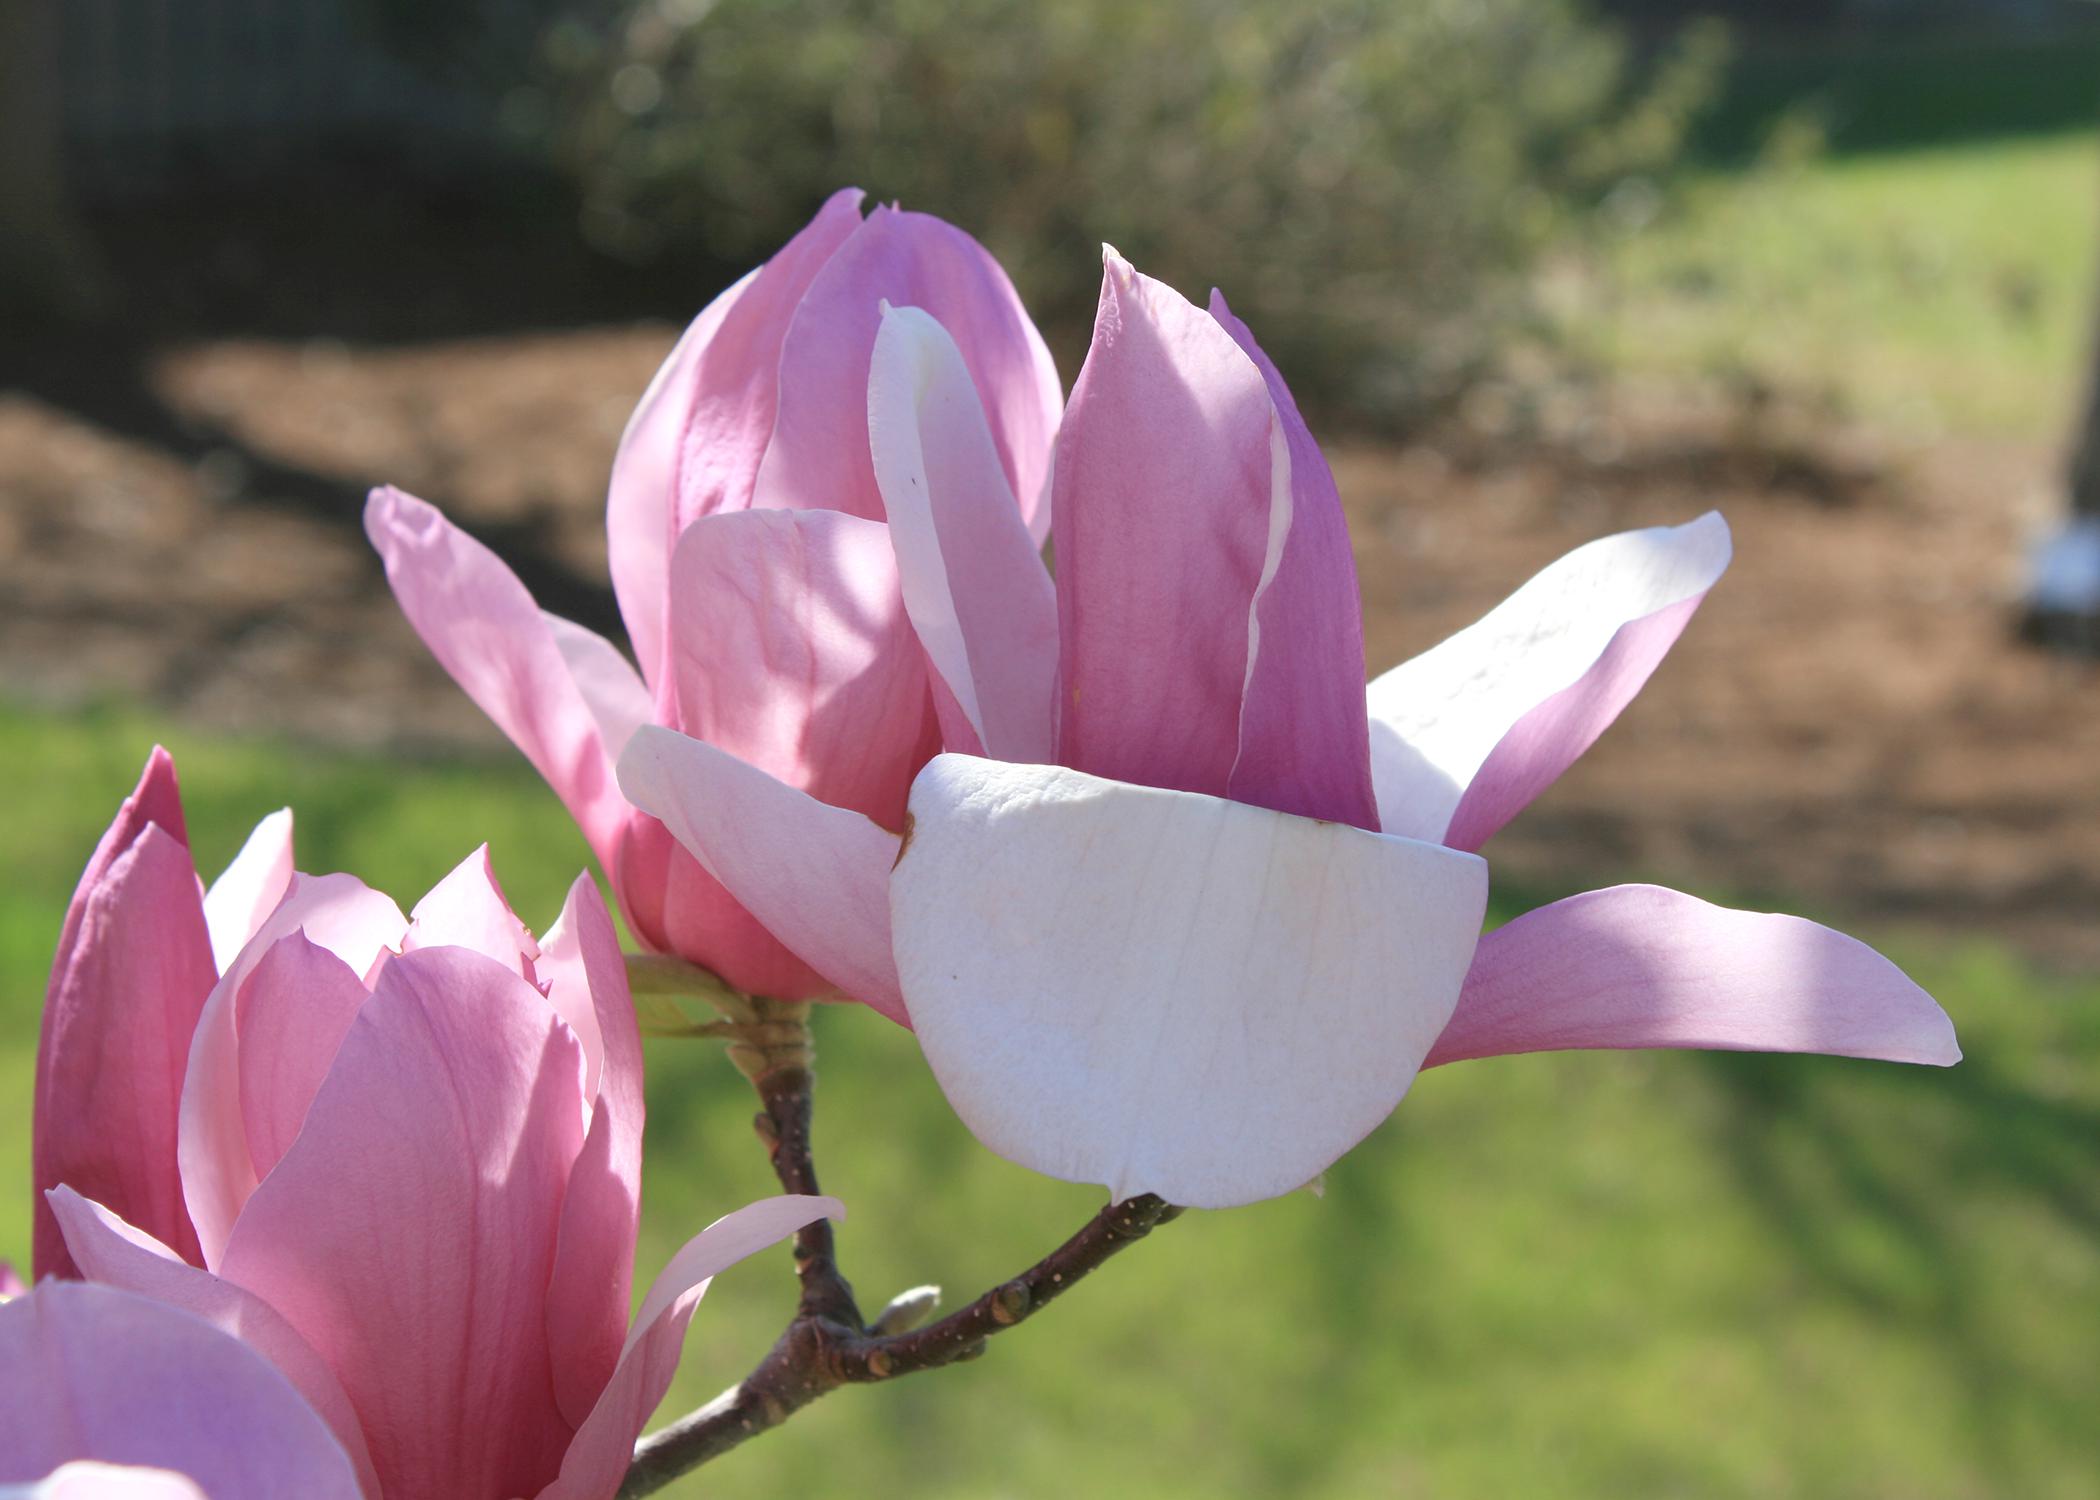 Some saucer magnolias can have blooms up to 10 inches across with colors ranging from white and pink to a bold purple. (Photo by MSU Extension/Gary Bachman)